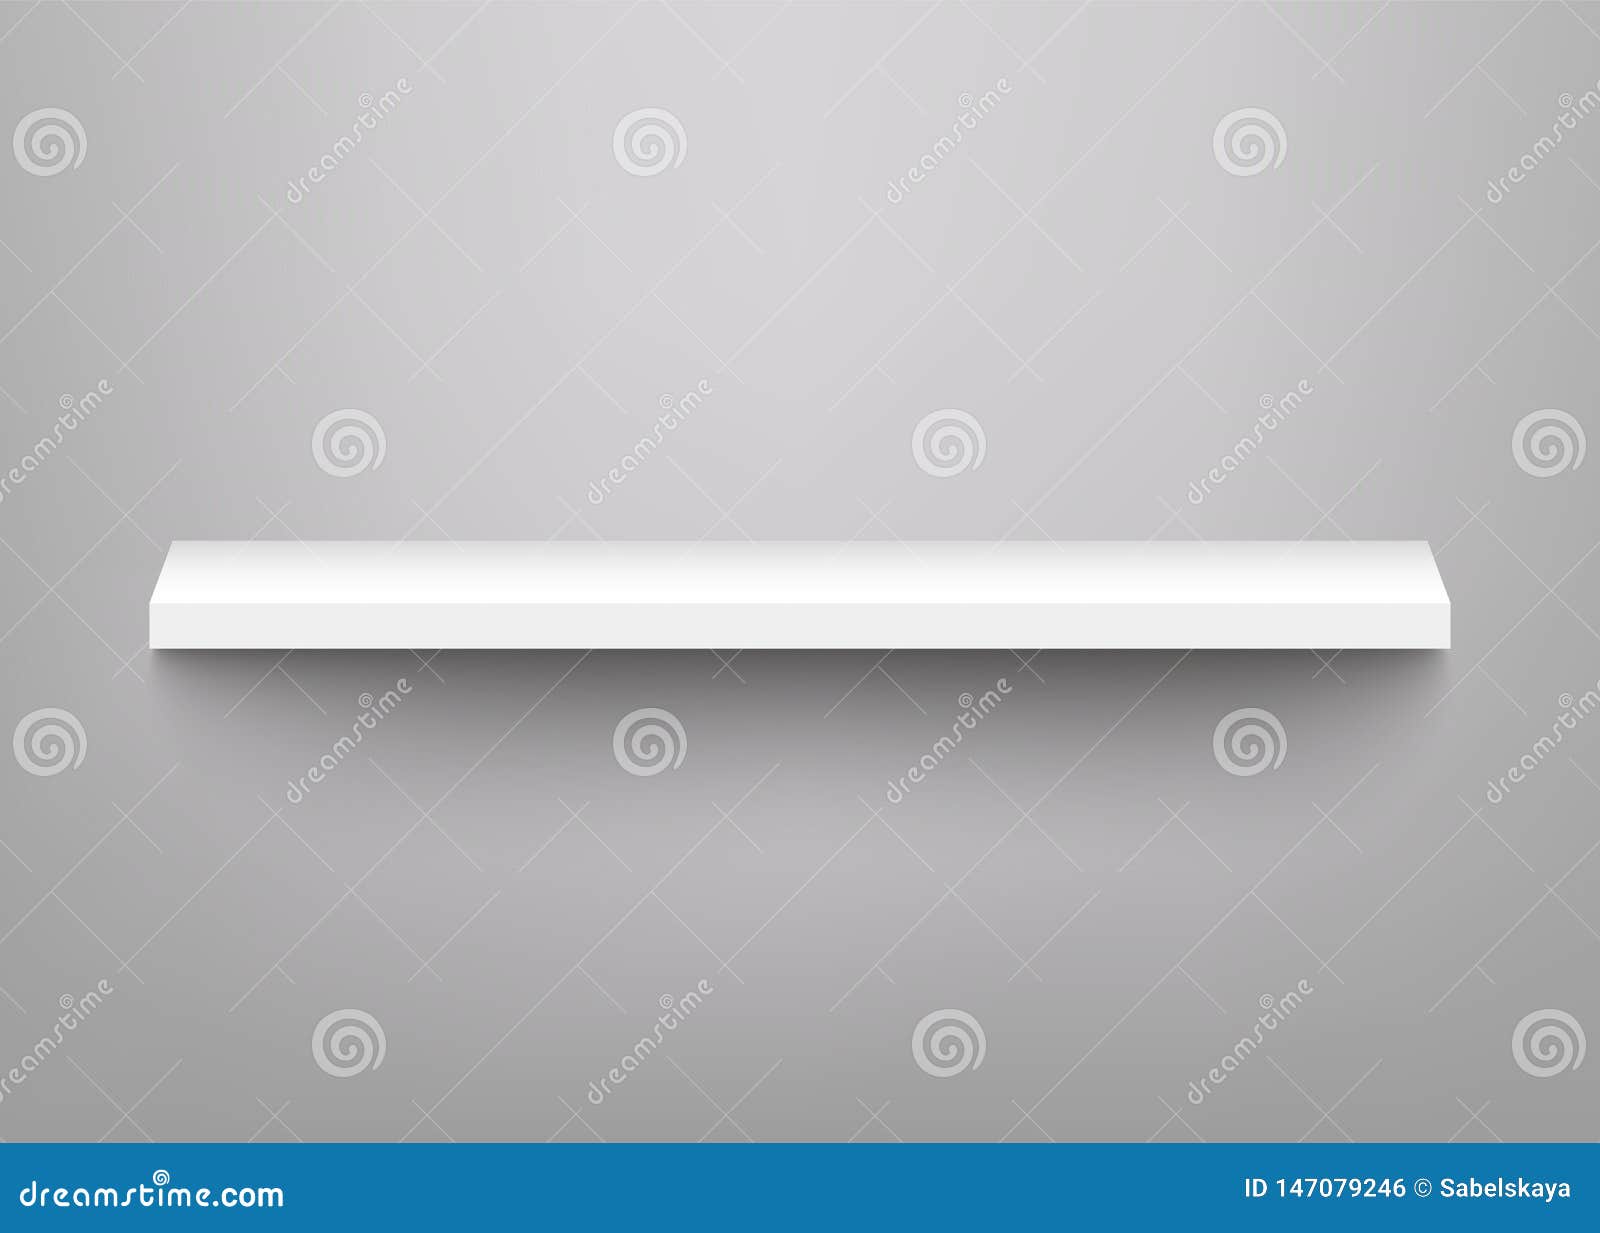 Download Vector White Shelves For Product Display Mockup Stock ...